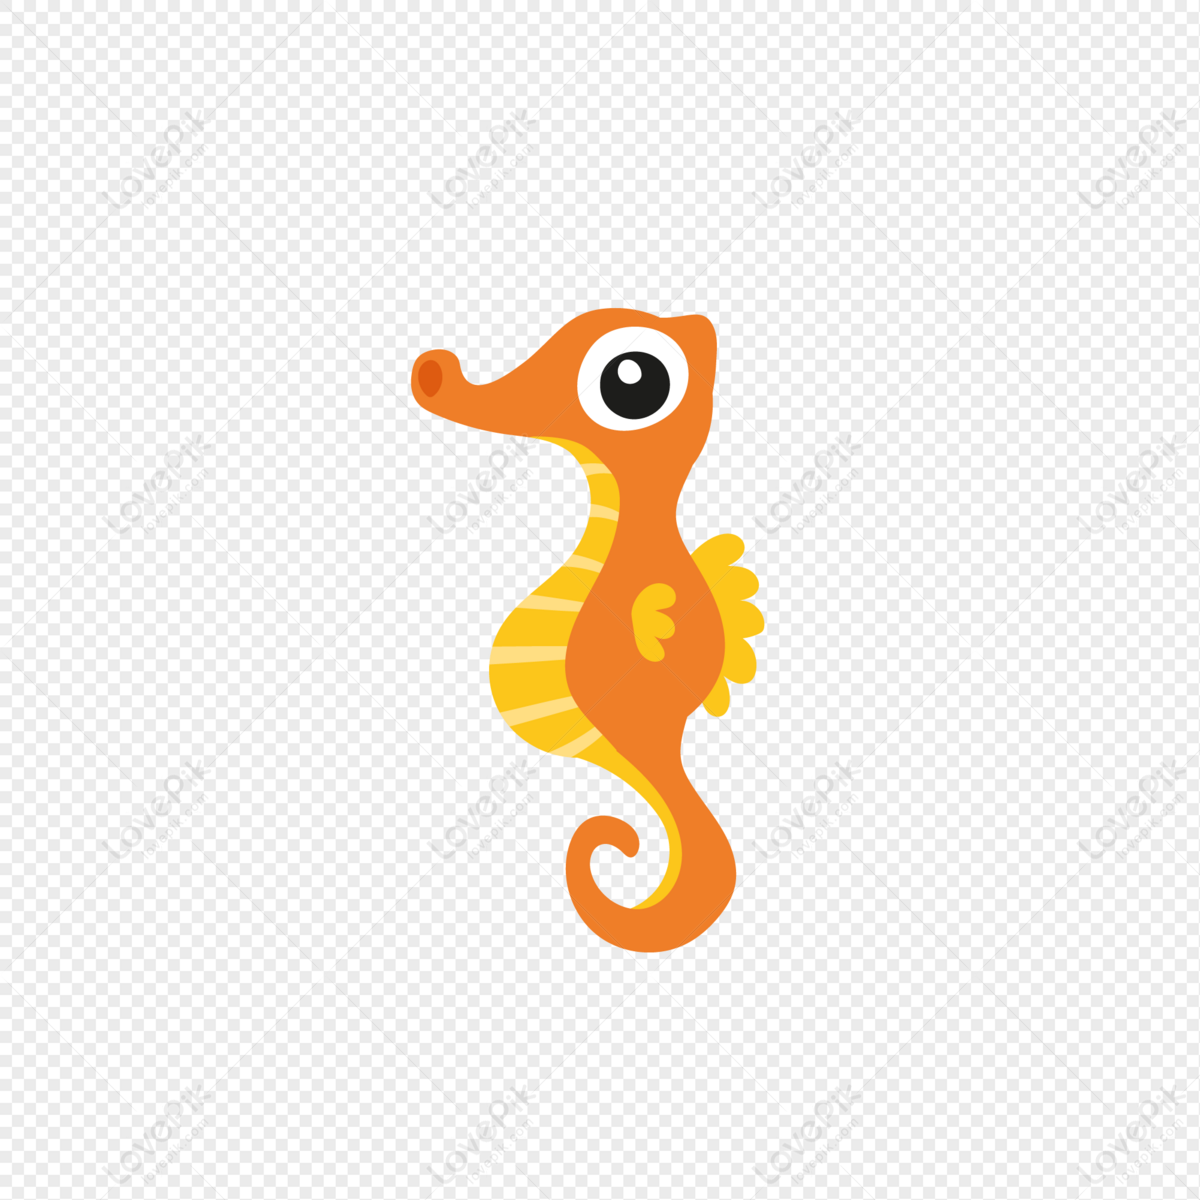 Seahorse PNG Image Free Download And Clipart Image For Free Download -  Lovepik | 401393201